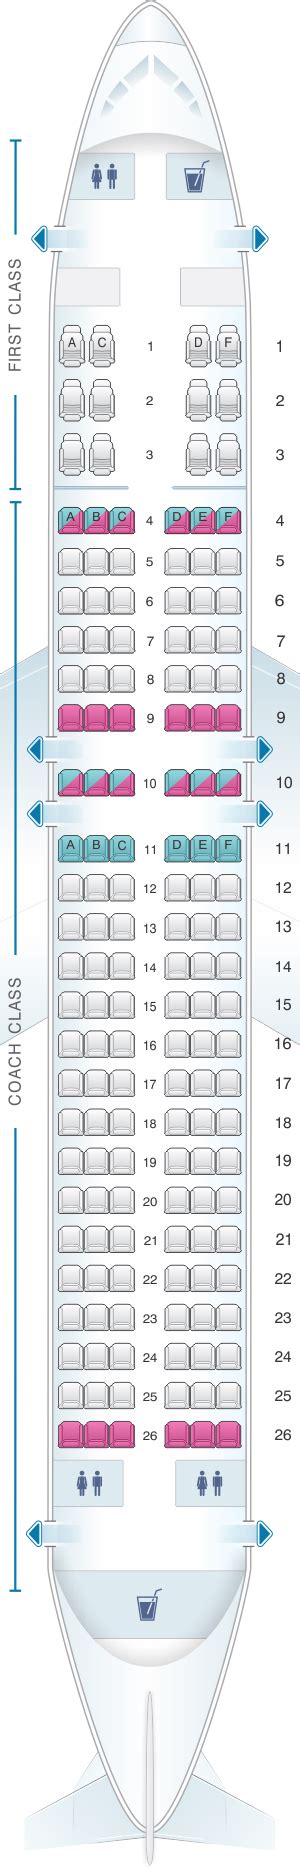 Airbus A Family Seating Chart